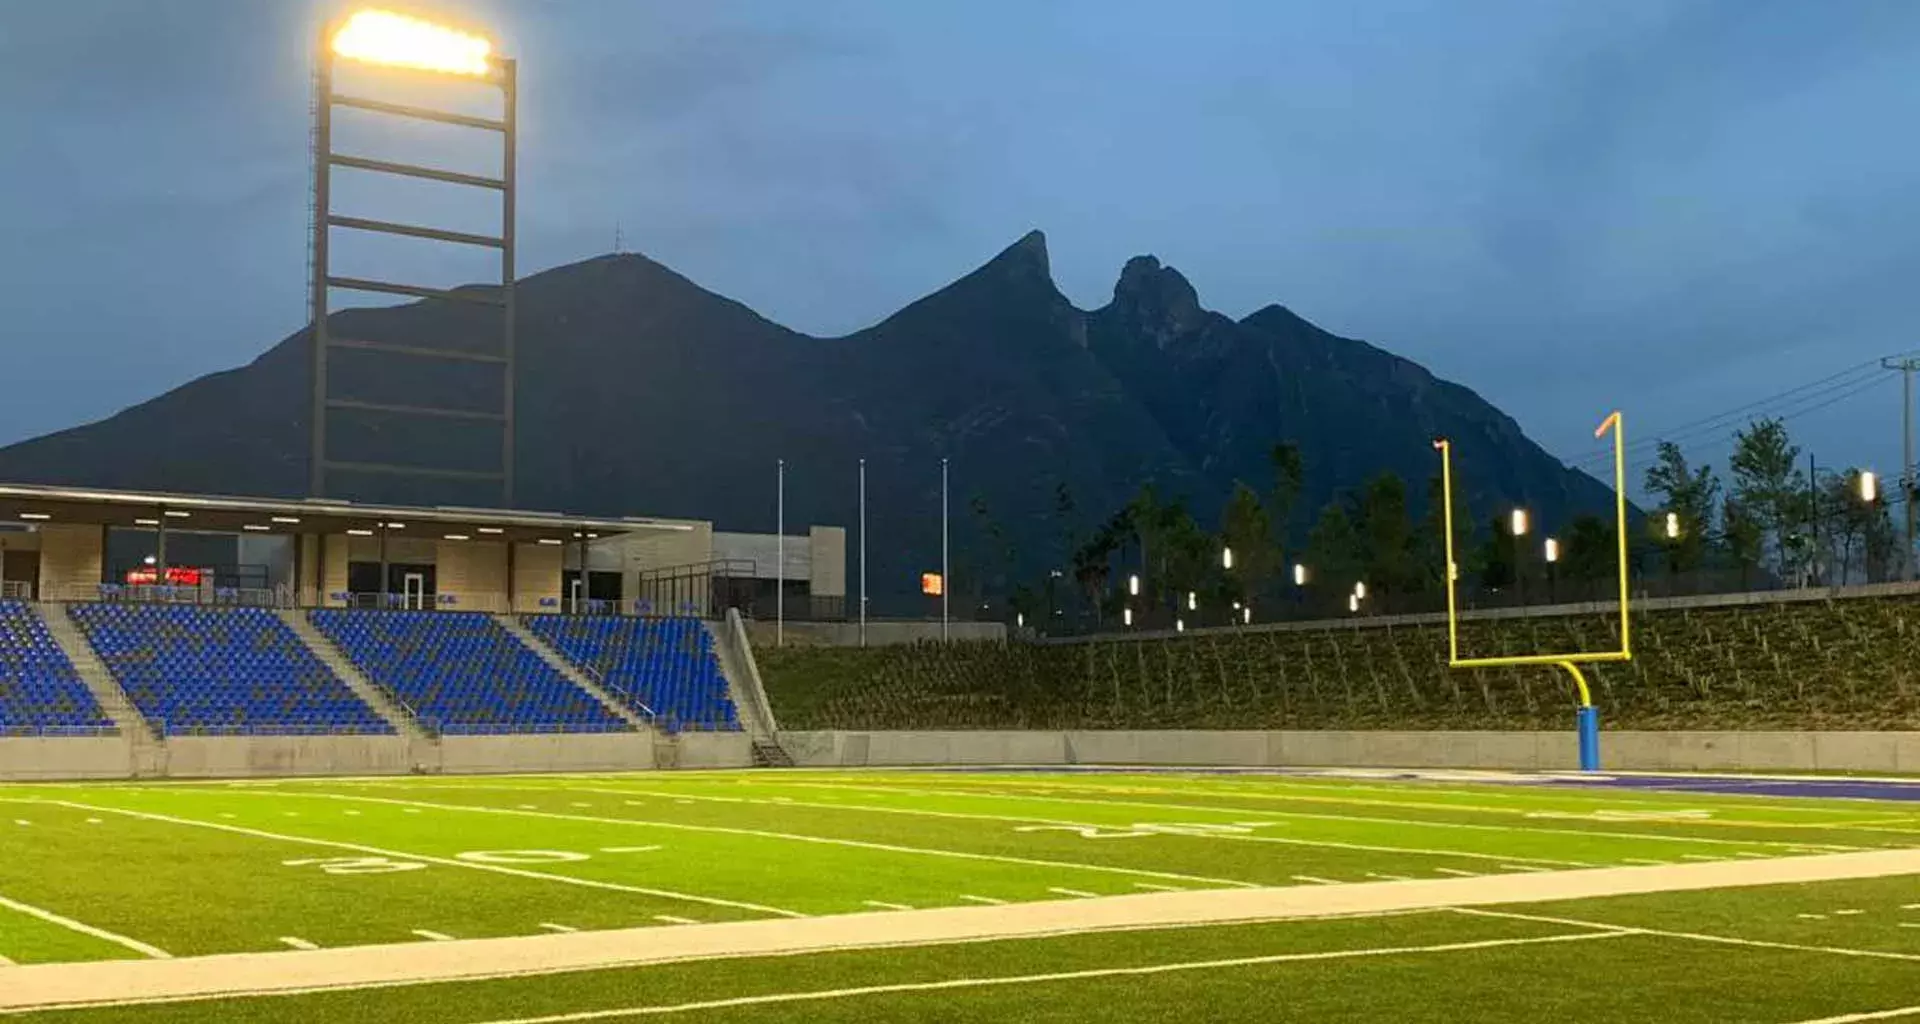 Beyond the stadium... 10 things the Tec is doing in Monterrey